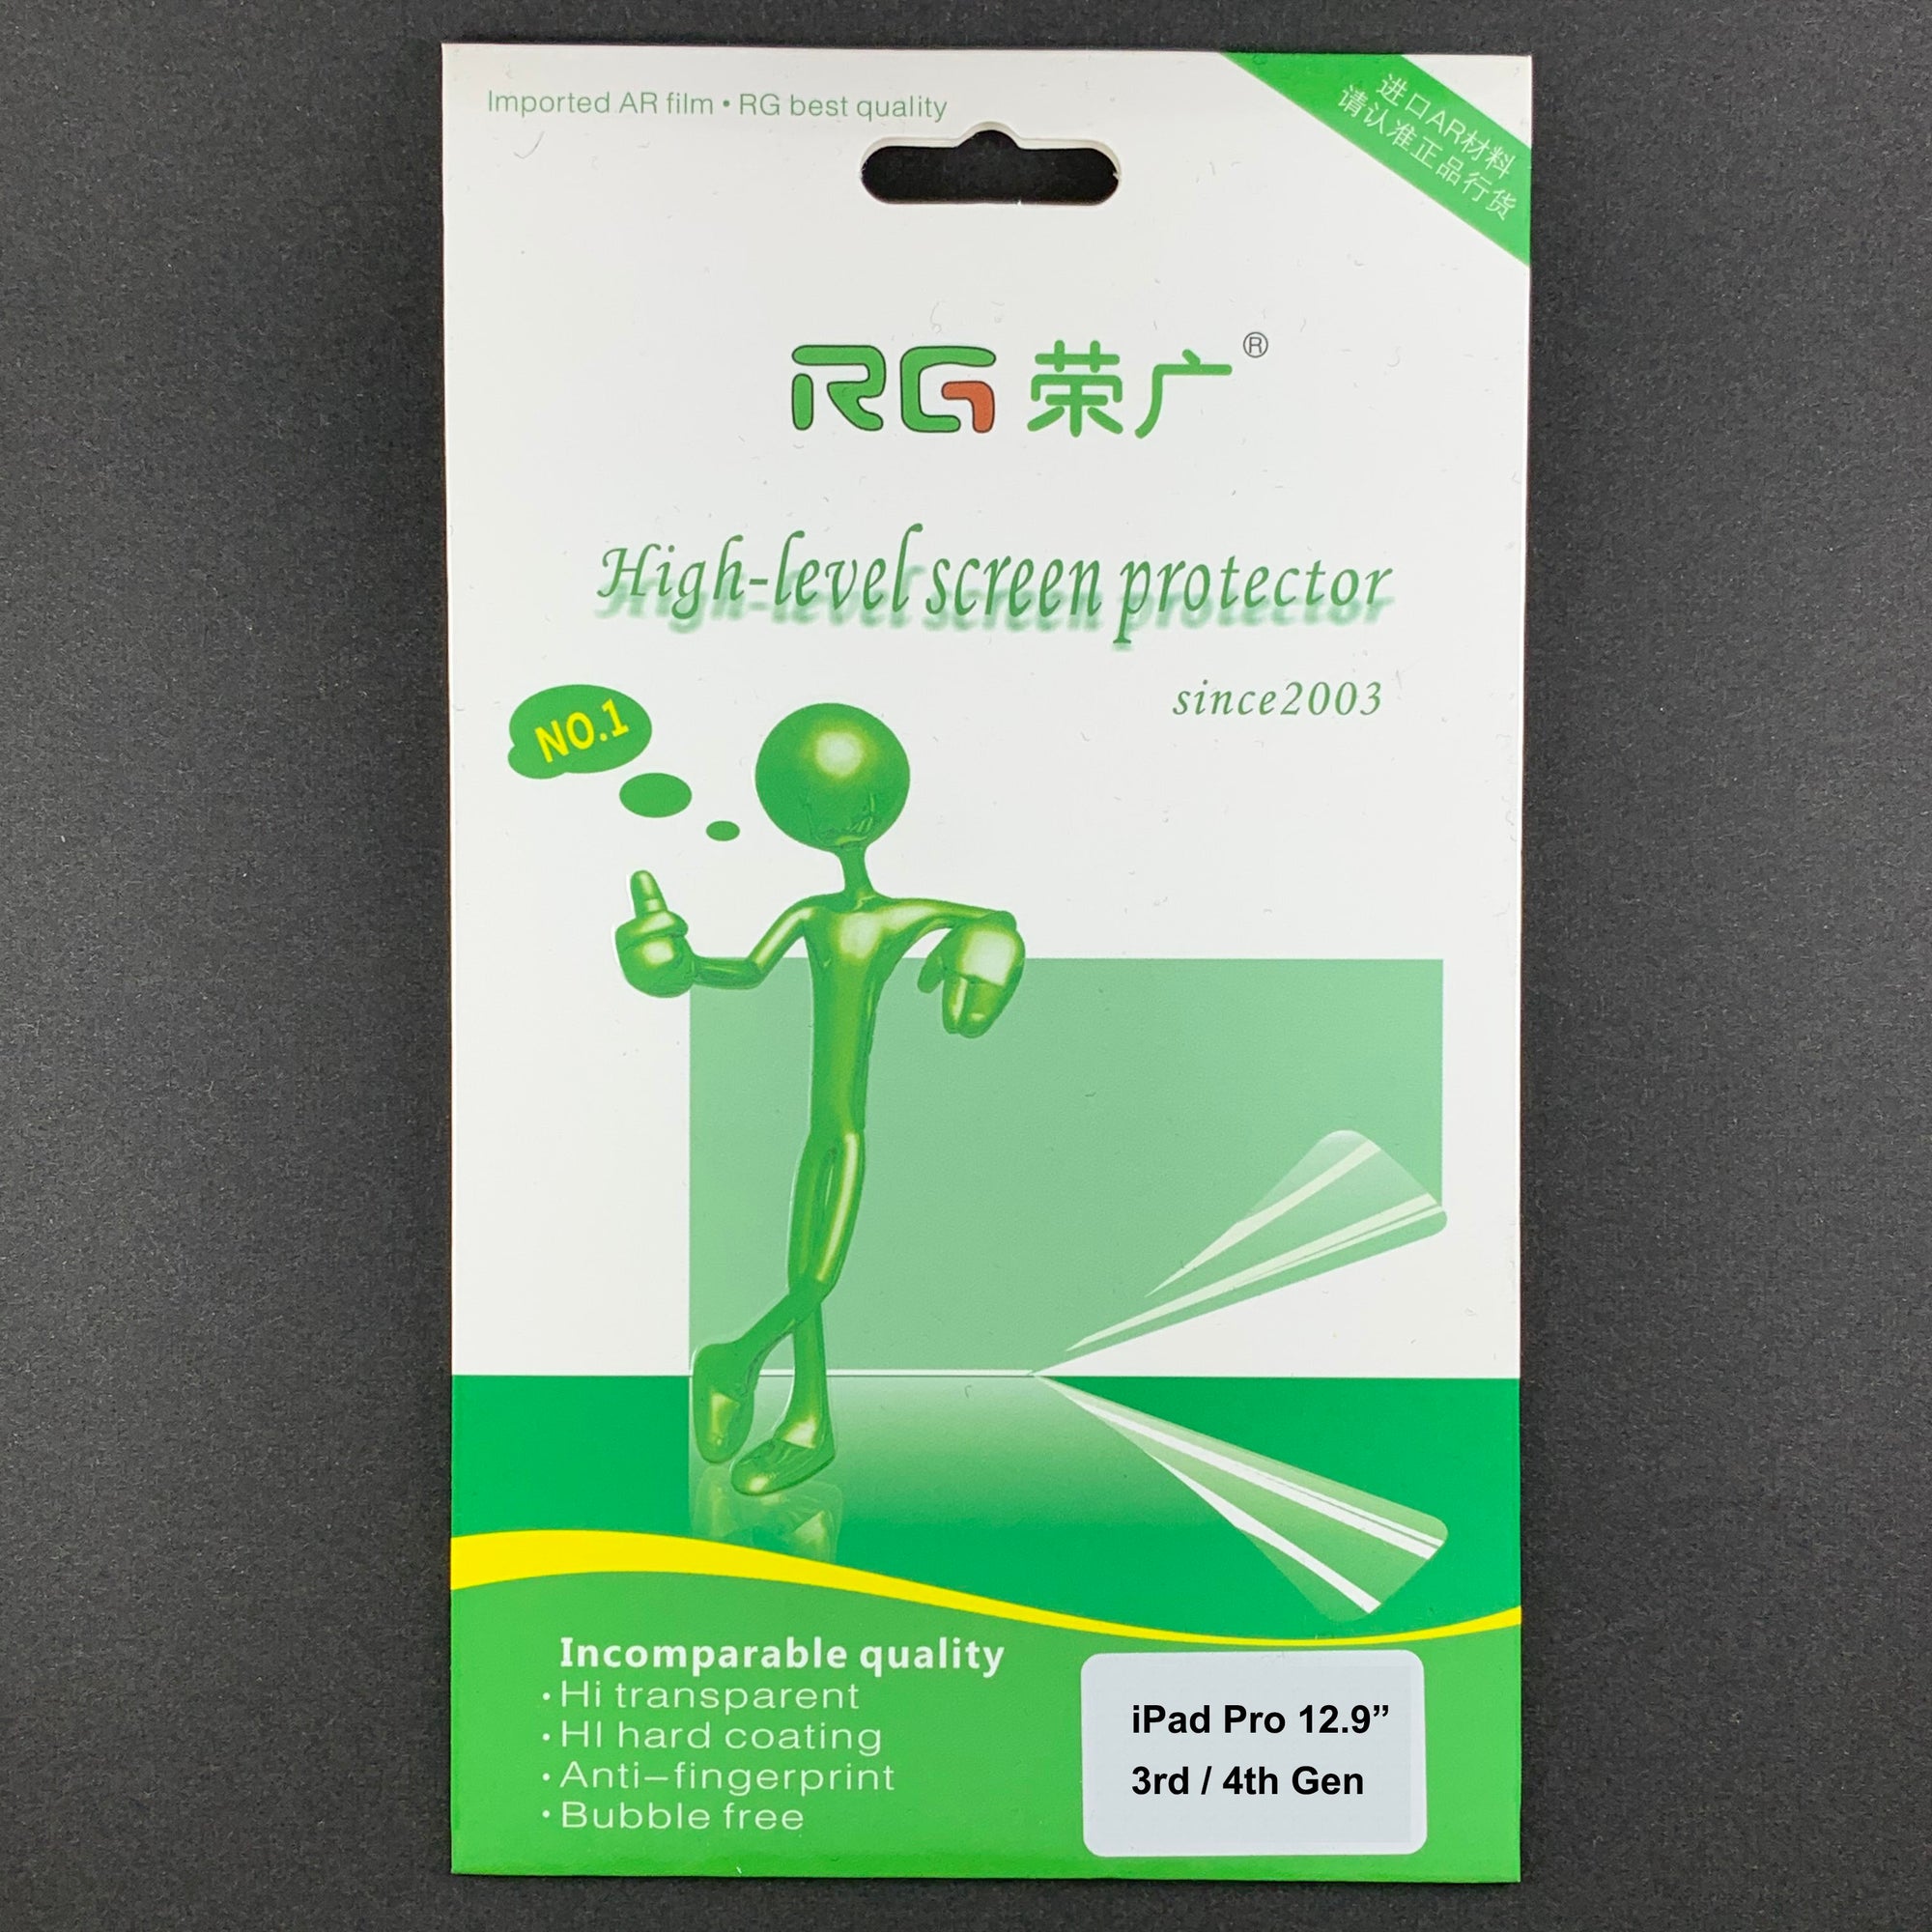 RG Professional Soft Film Screen Protector for iPad Pro 12.9" 3rd / 4th Gen (CLEAR, 2-PACK)